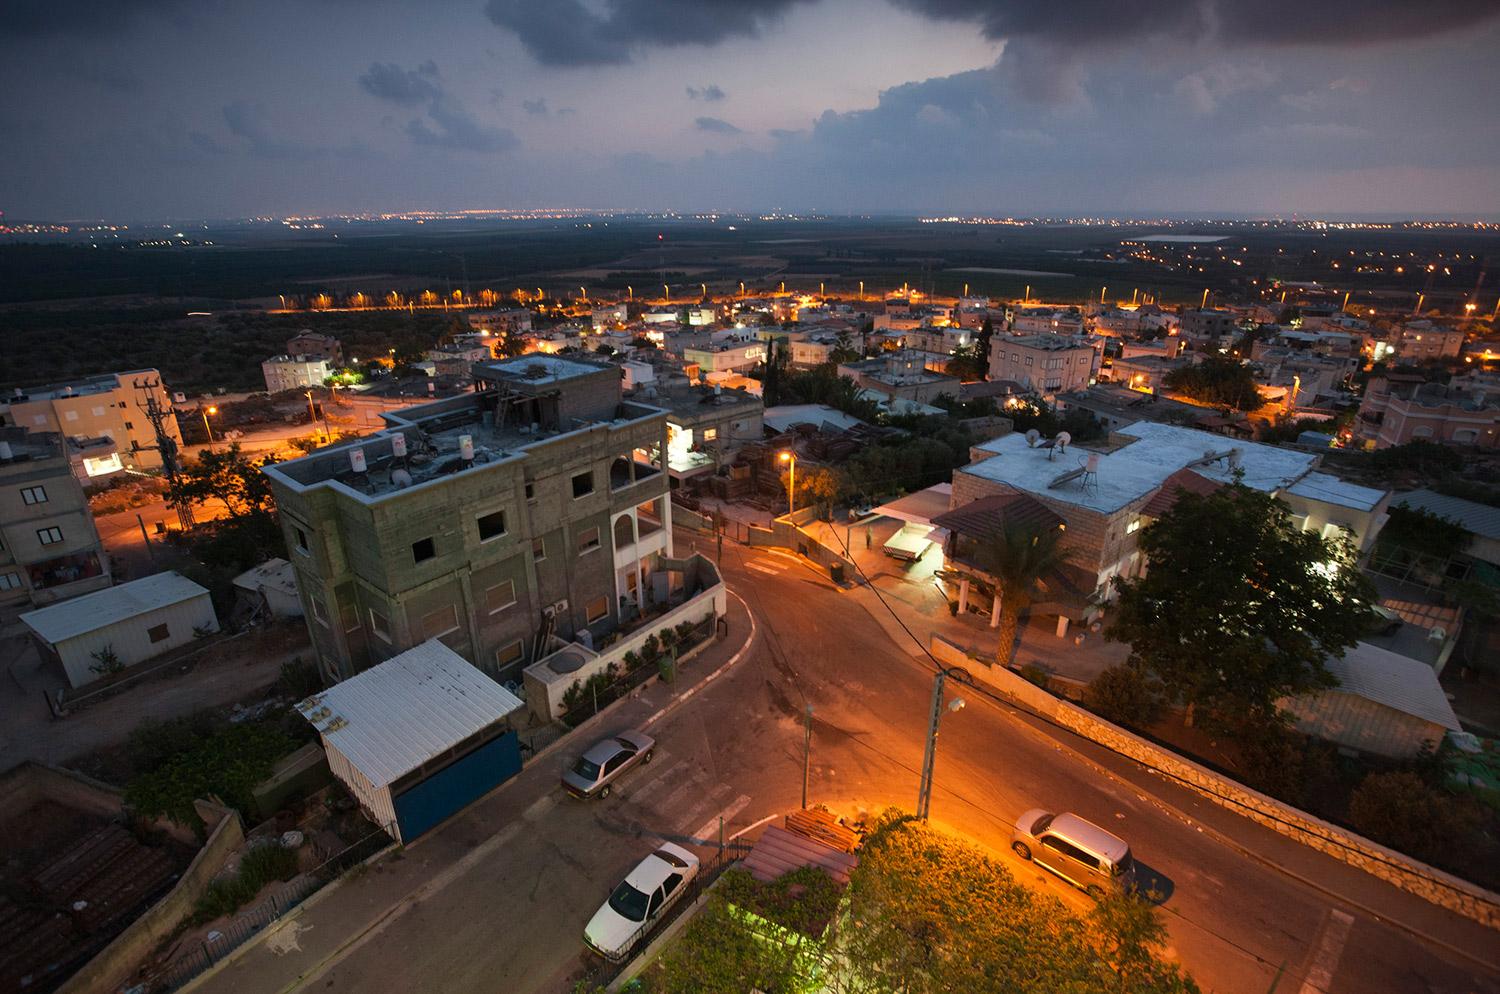 A view of Sheikh Danun village in northern Israel. The larger part of the residents in the village is Muslim and the rest are Christian. Most Arab villages suffer from low budget allocations and corruption leading to lower investments in infrastructure and education facilities.